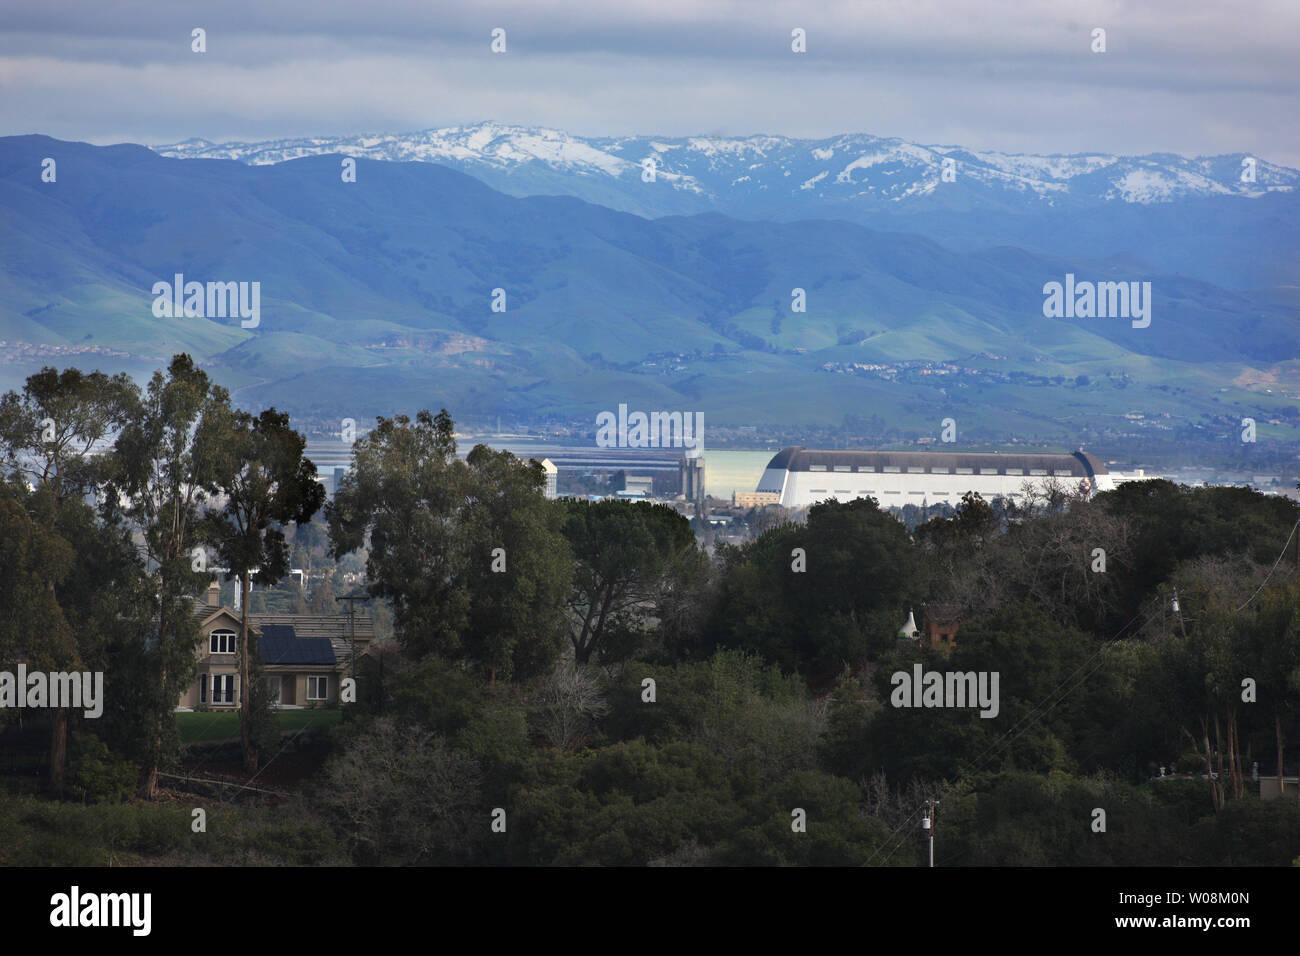 Snow dusts the mountain tops above Silicon Valley as cold temperatures and overnight precipitation pushed the snow line within sight of a house in Palo Alto (L) and the dirigible hanger (R) at Moffett Field, California on February 14, 2009.   (UPI Photo/Terry Schmitt) Stock Photo